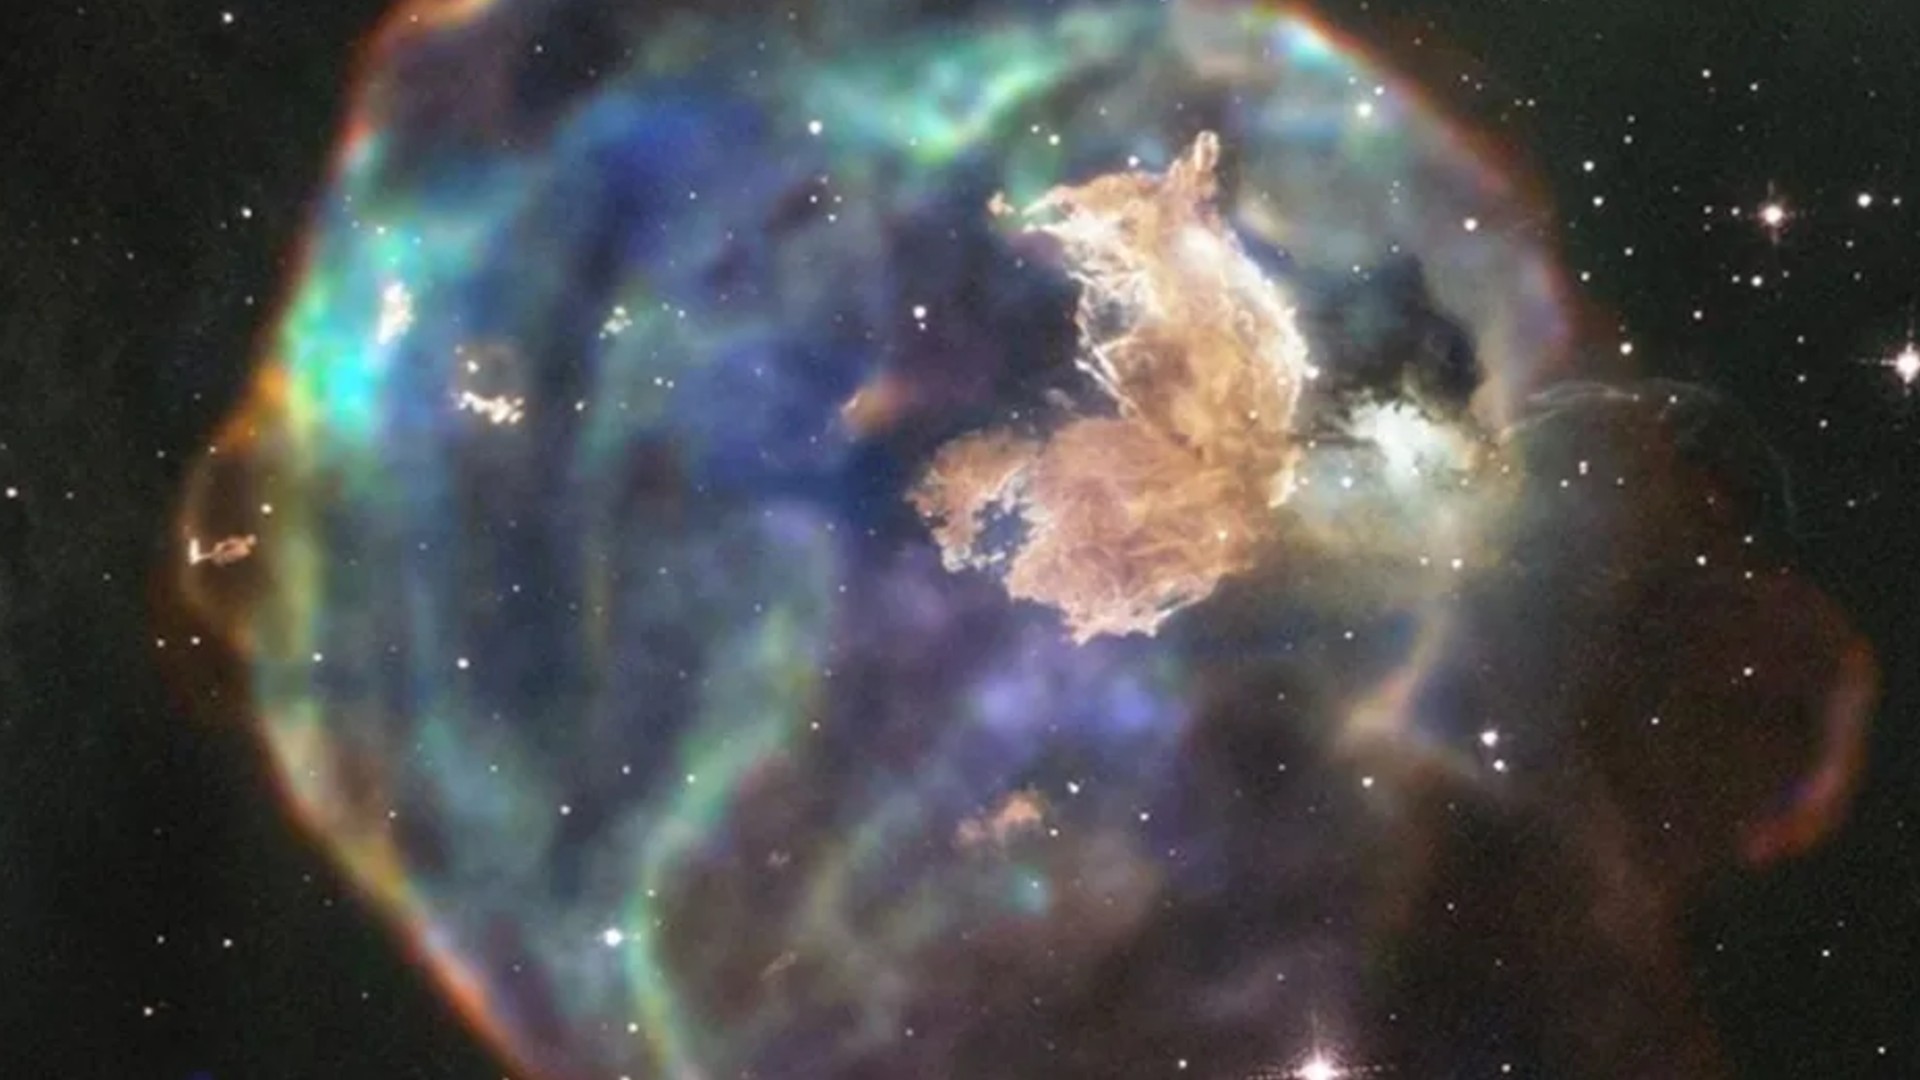 Stunning Supernova Remnant ‘N63A’ Seen in Large Magellanic Cloud! NASA Shares Images!